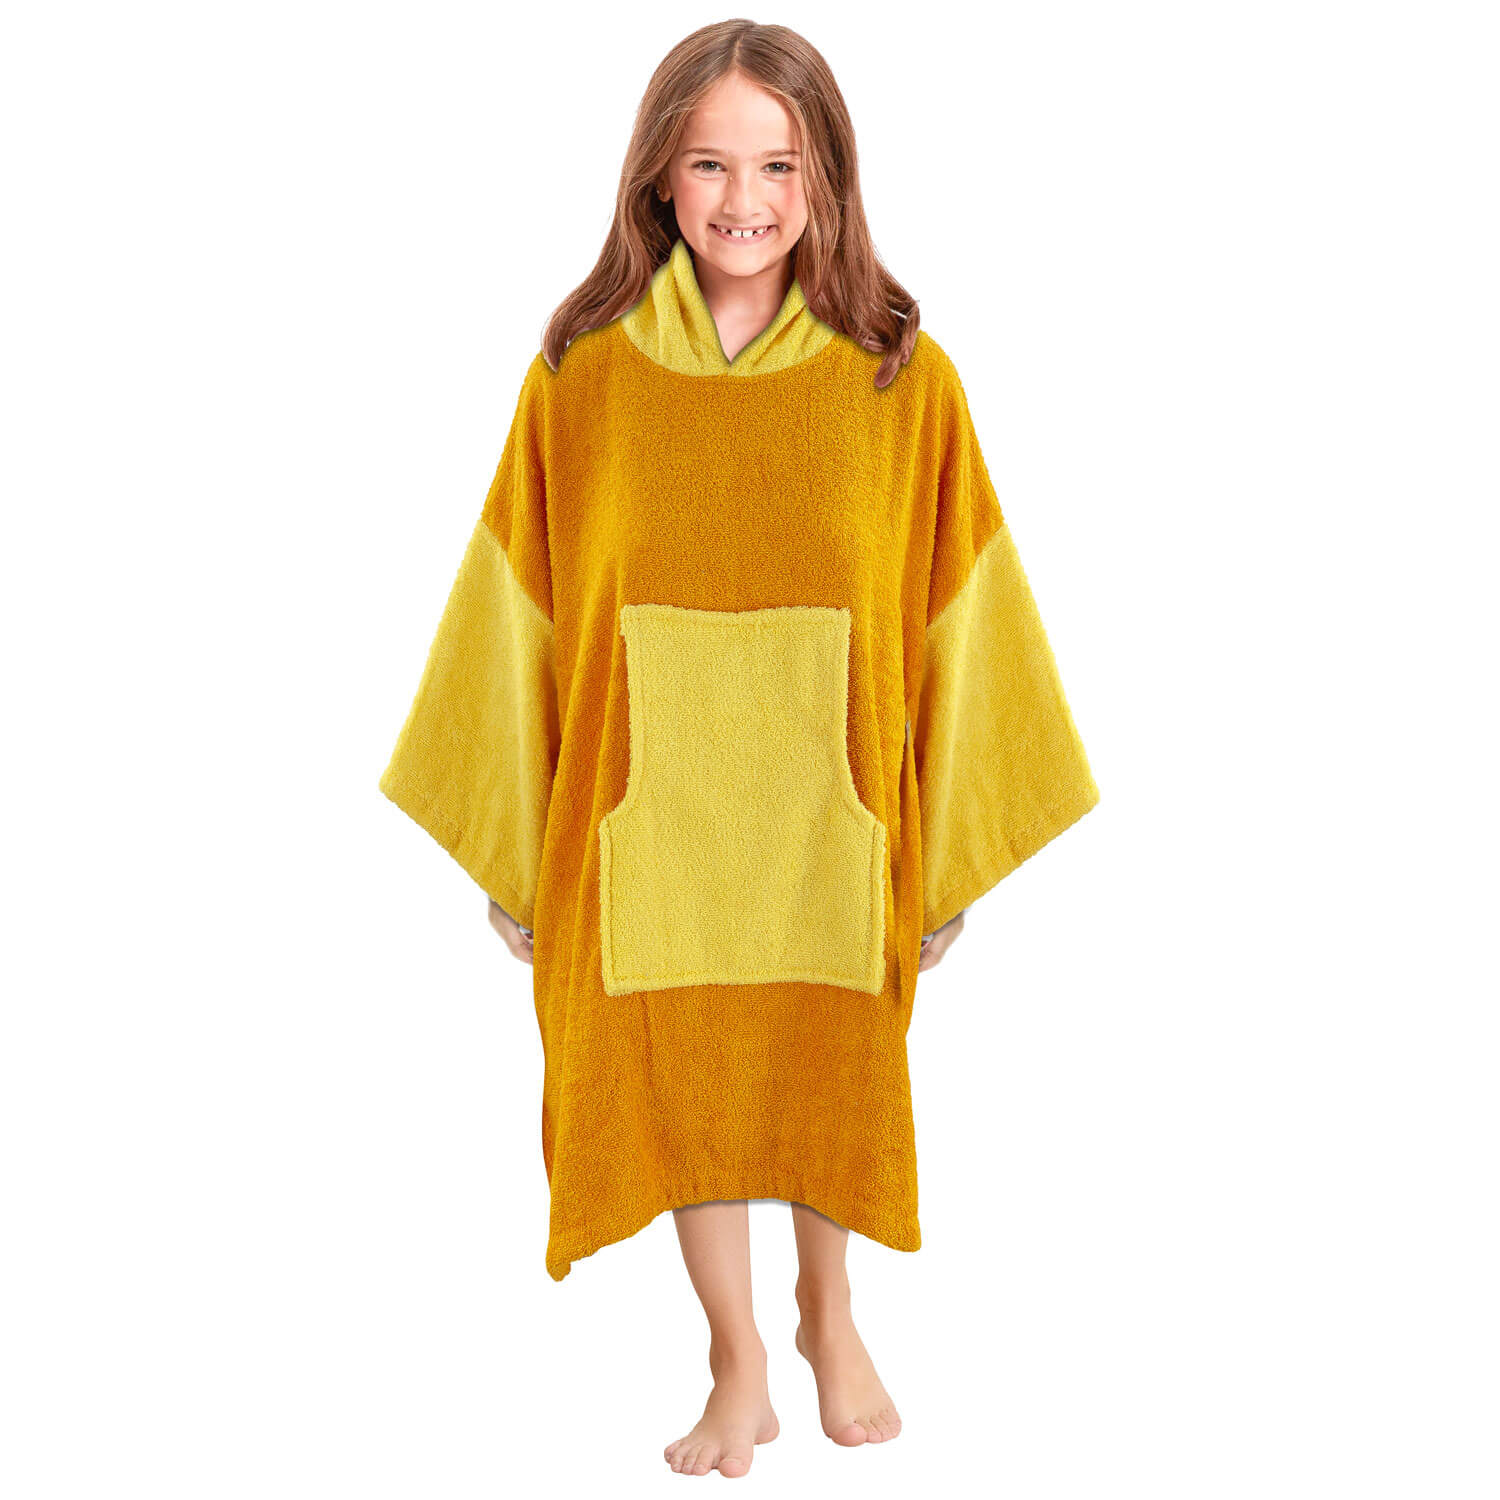 The Home Collection Kids Long Sleeve Poncho Towel - 100% Cotton 7 Shaws Department Stores